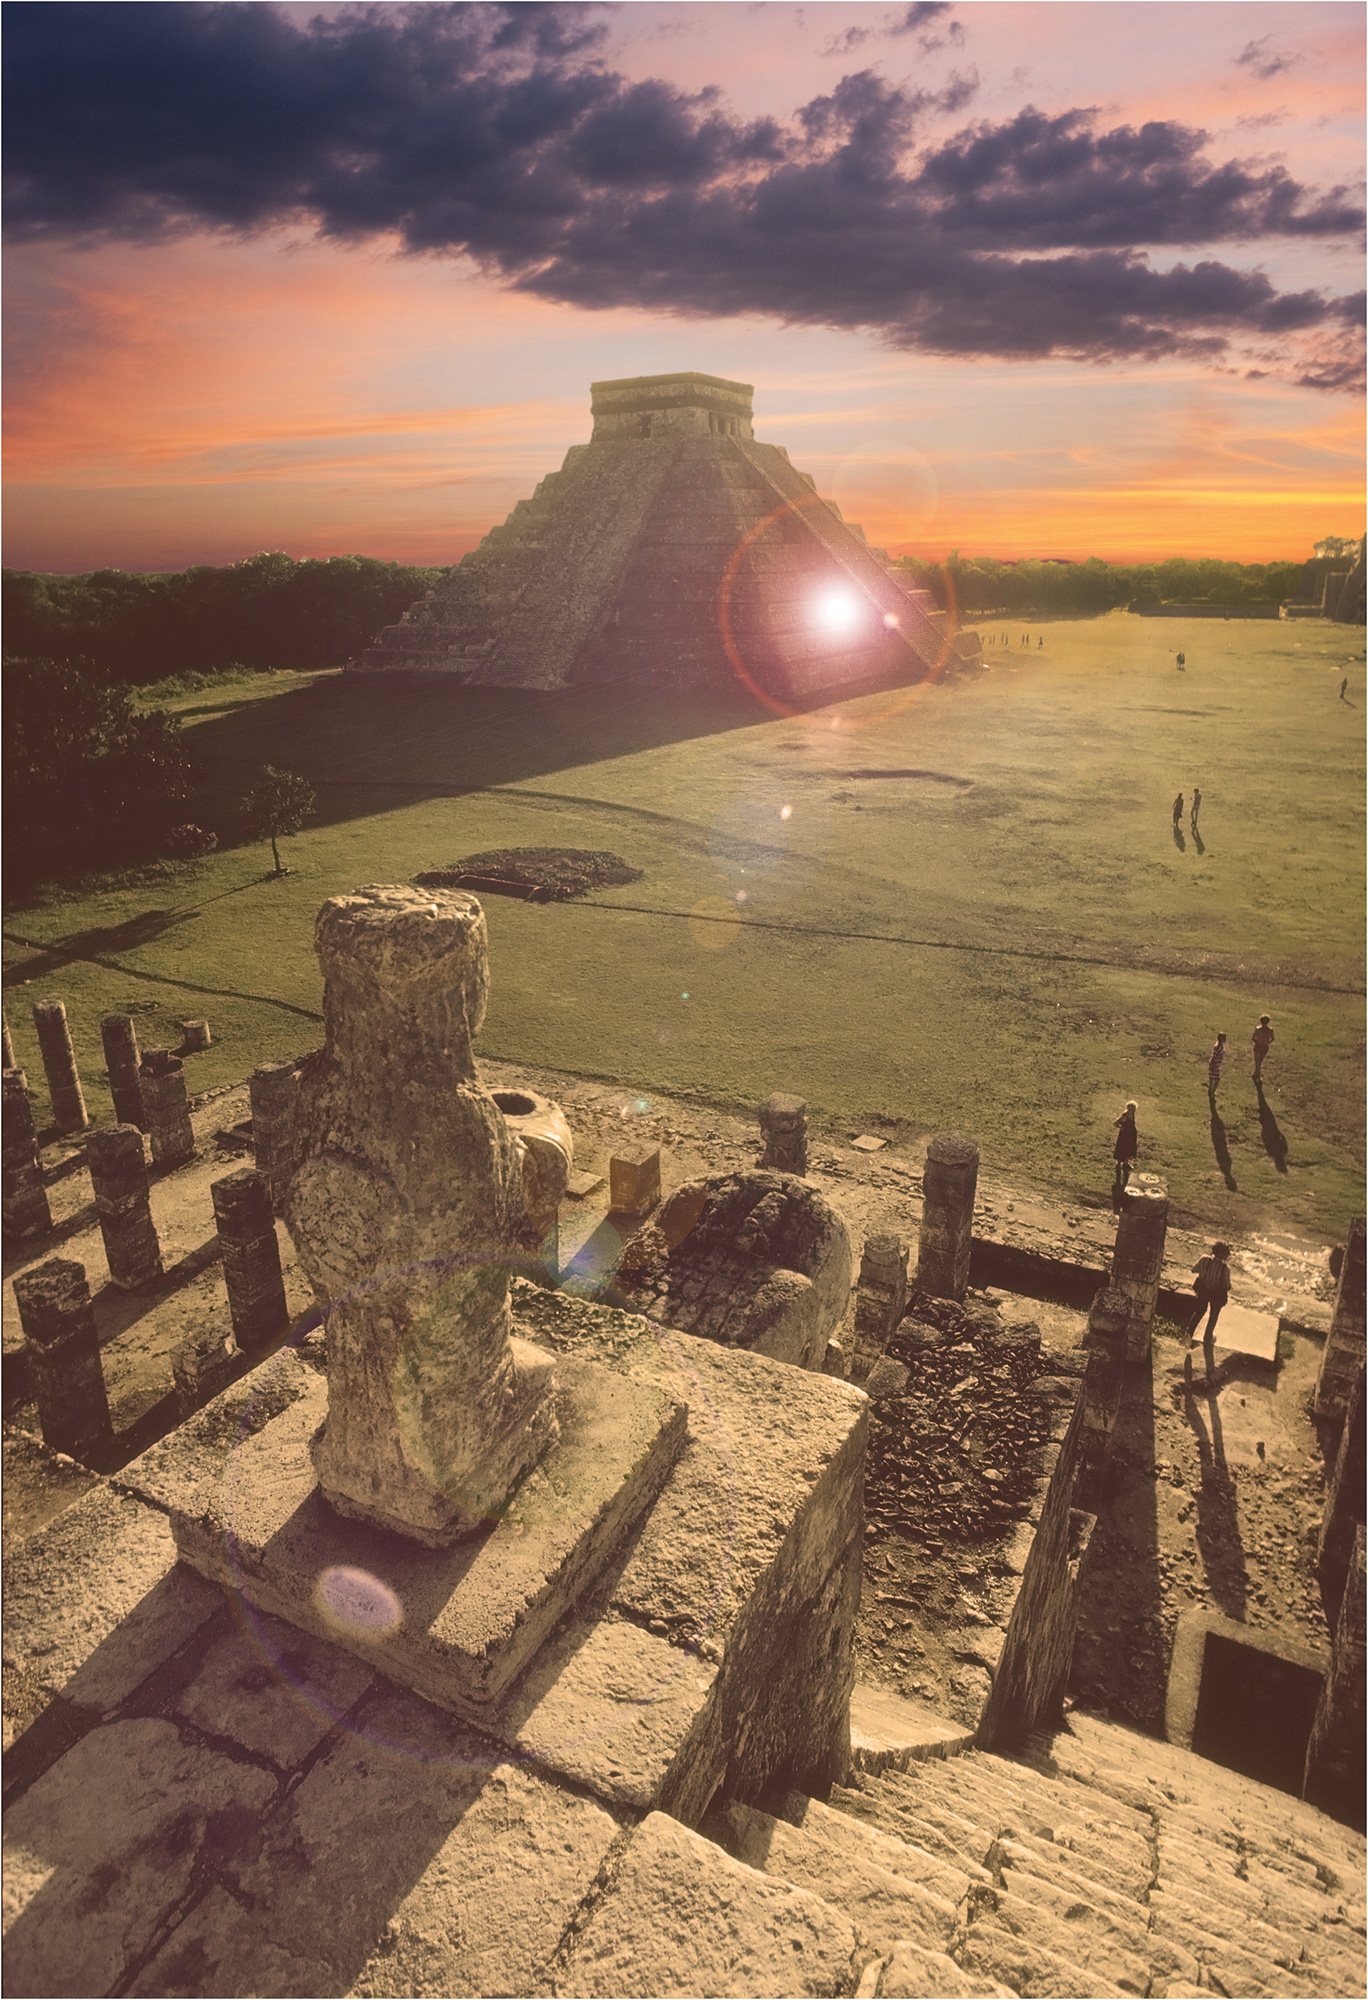 Photo 1.2, “Maya Pyramid, Chichén Itzá, Mexico” is a contemporary color photograph of the Mayan pyramid Kukulcan El Castillo, taken at dusk from about halfway up a neighboring pyramid by photographer Christian Delbert. 